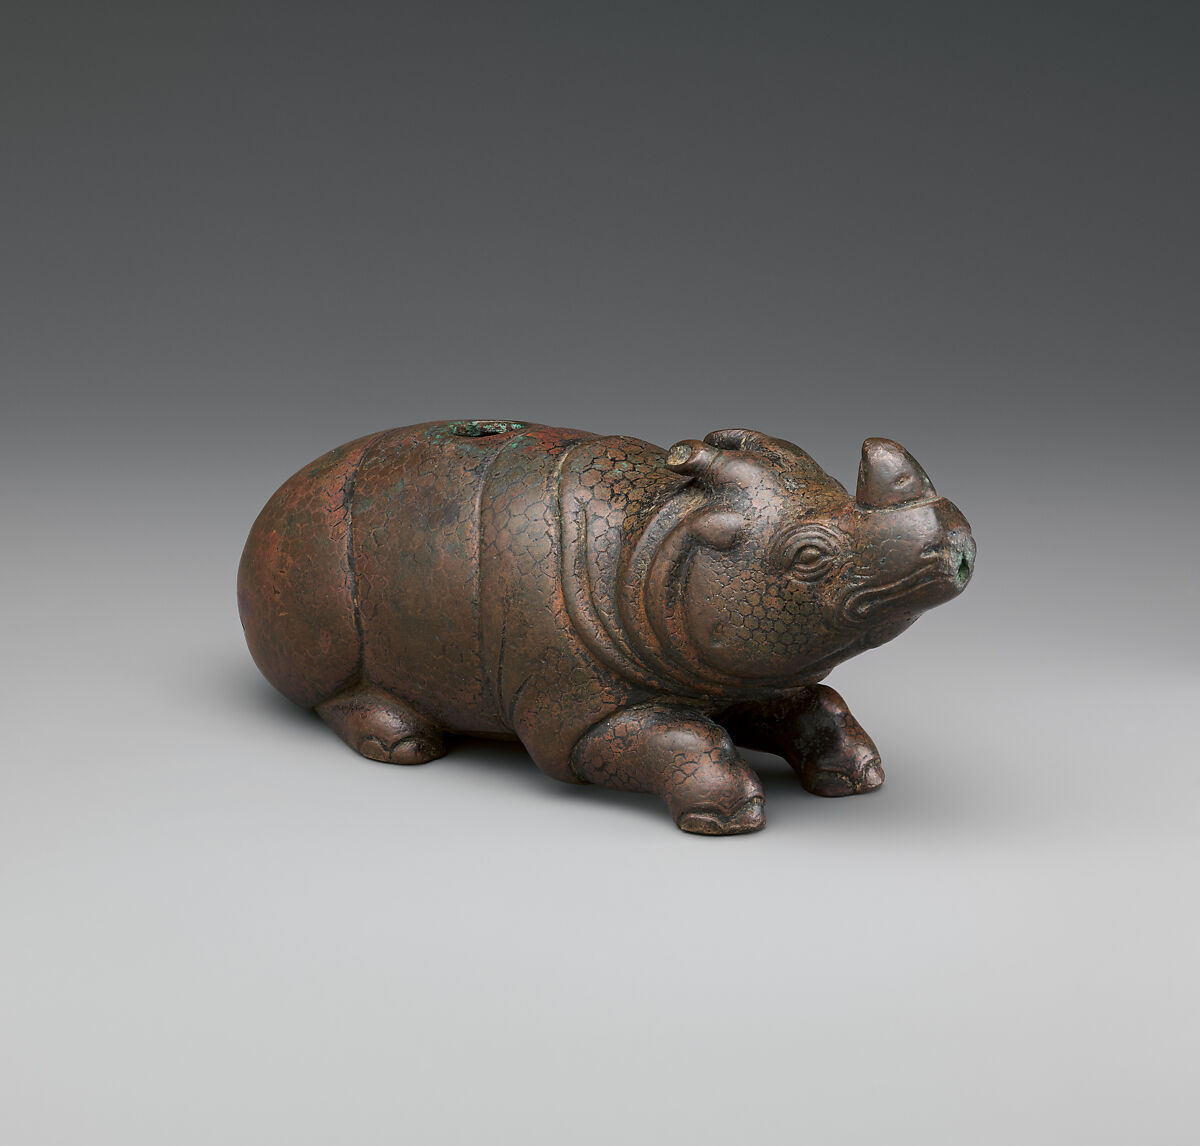 Water dropper in the form of a rhinoceros, Bronze, China 